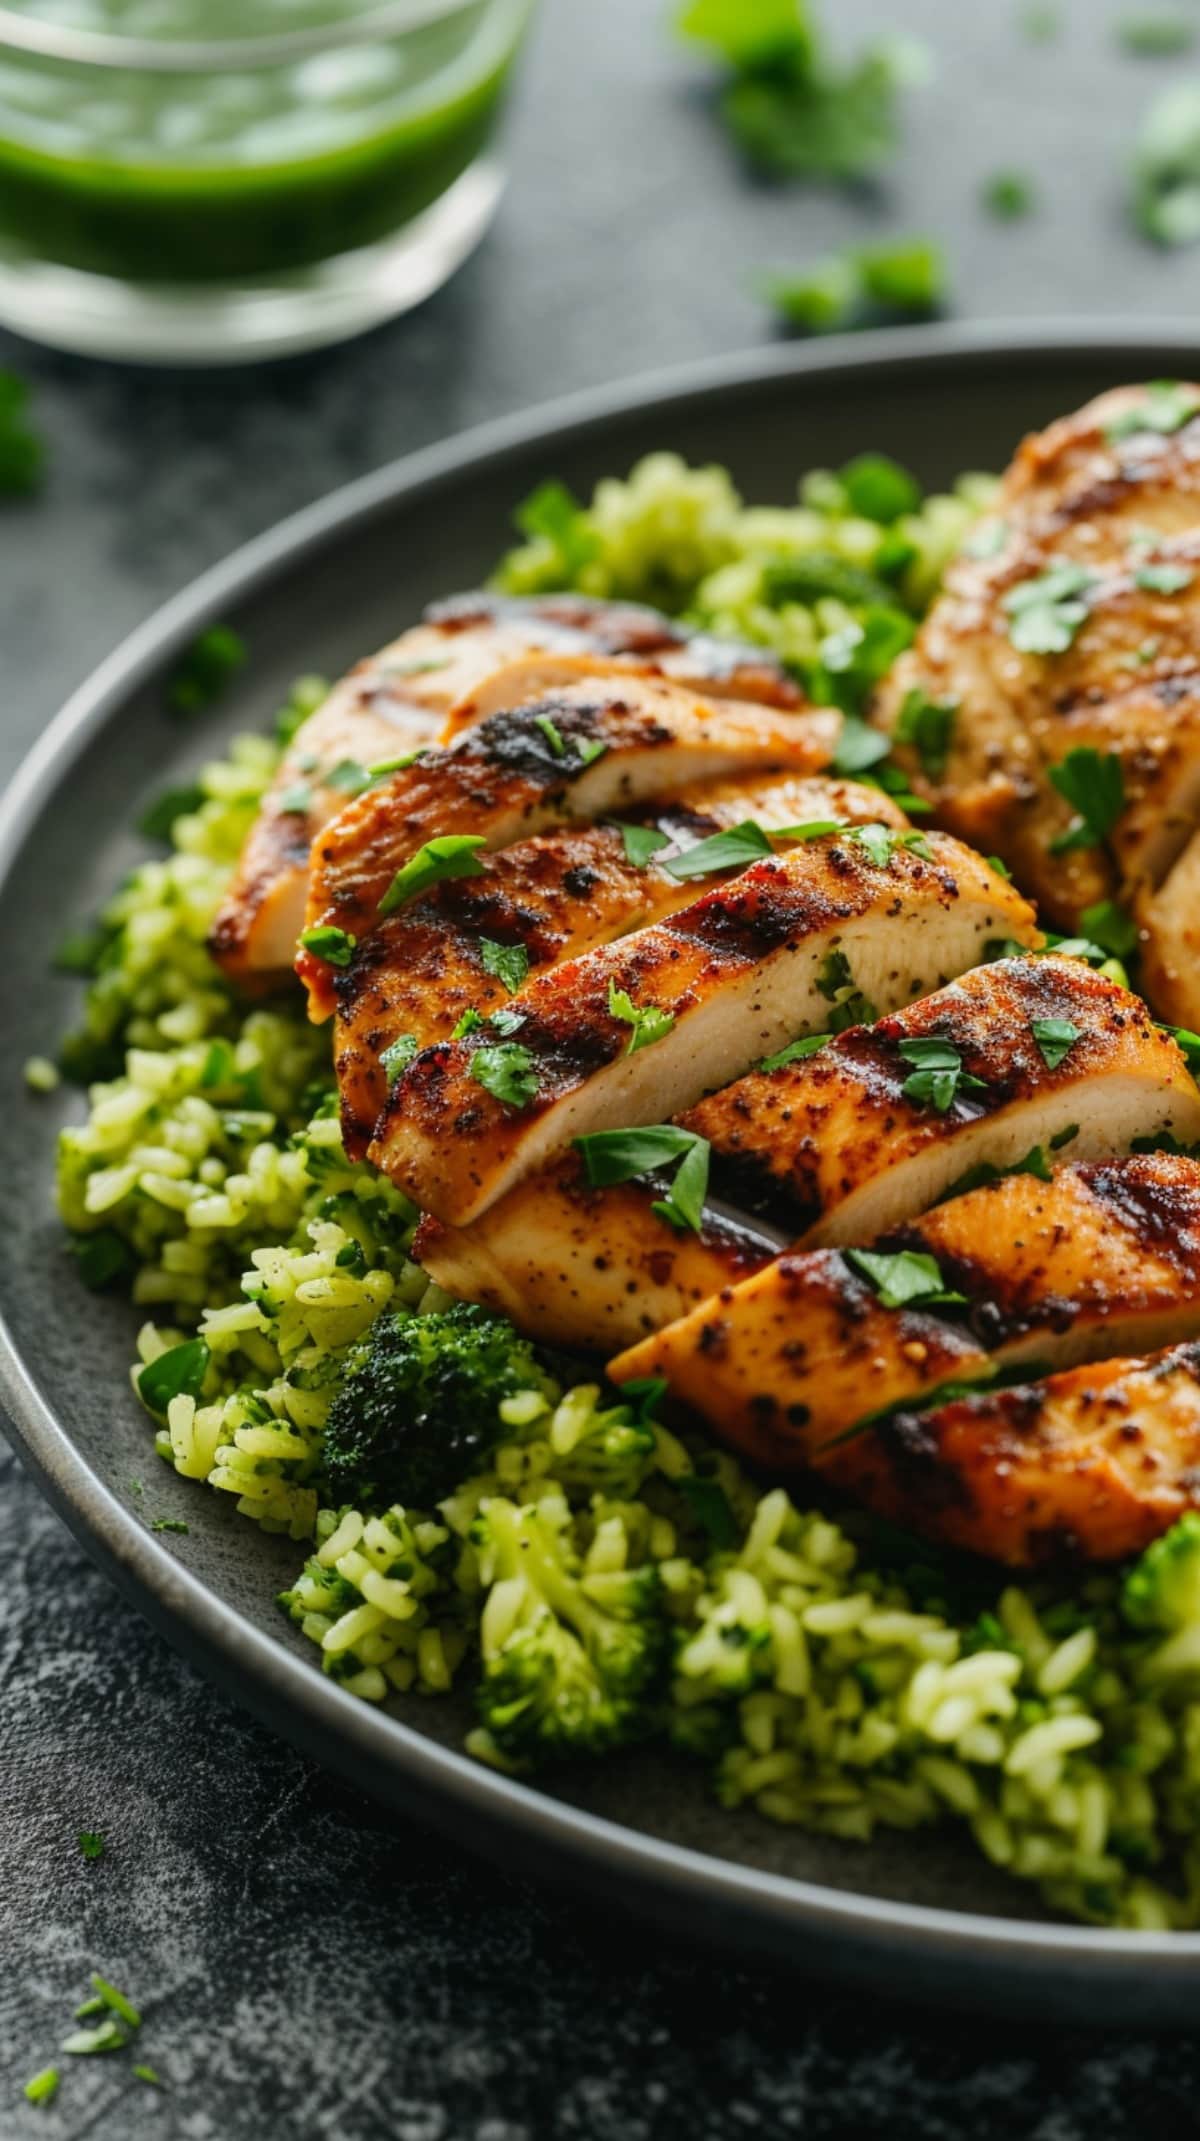 Riced Broccoli with Grilled Chicken
